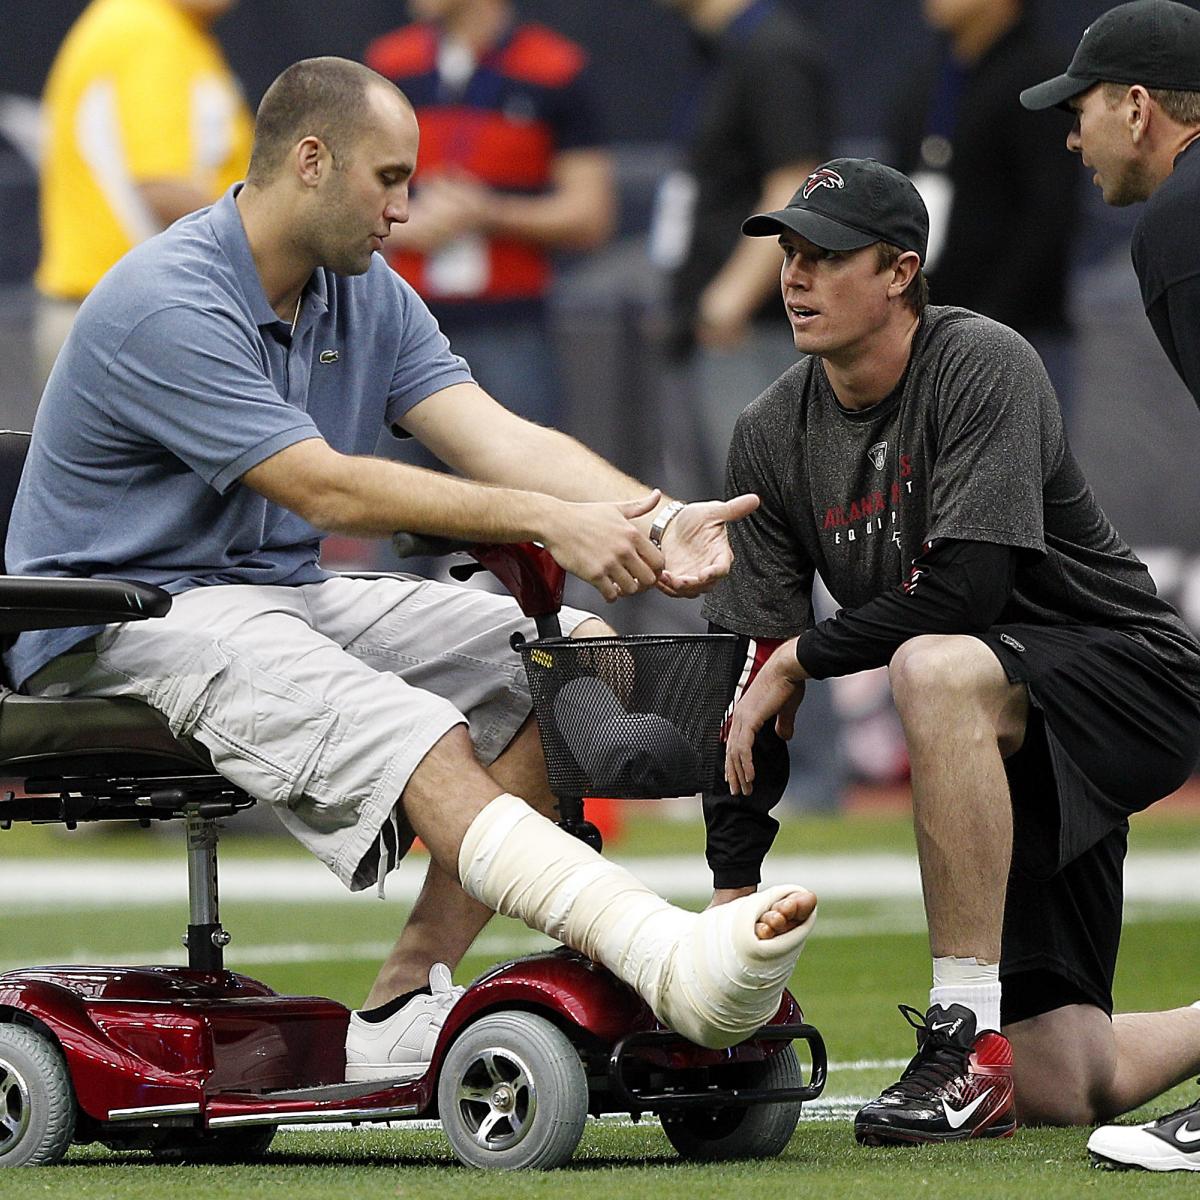 2011's Worst NFL Injuries Who Appears Fully Recovered in Training Camp